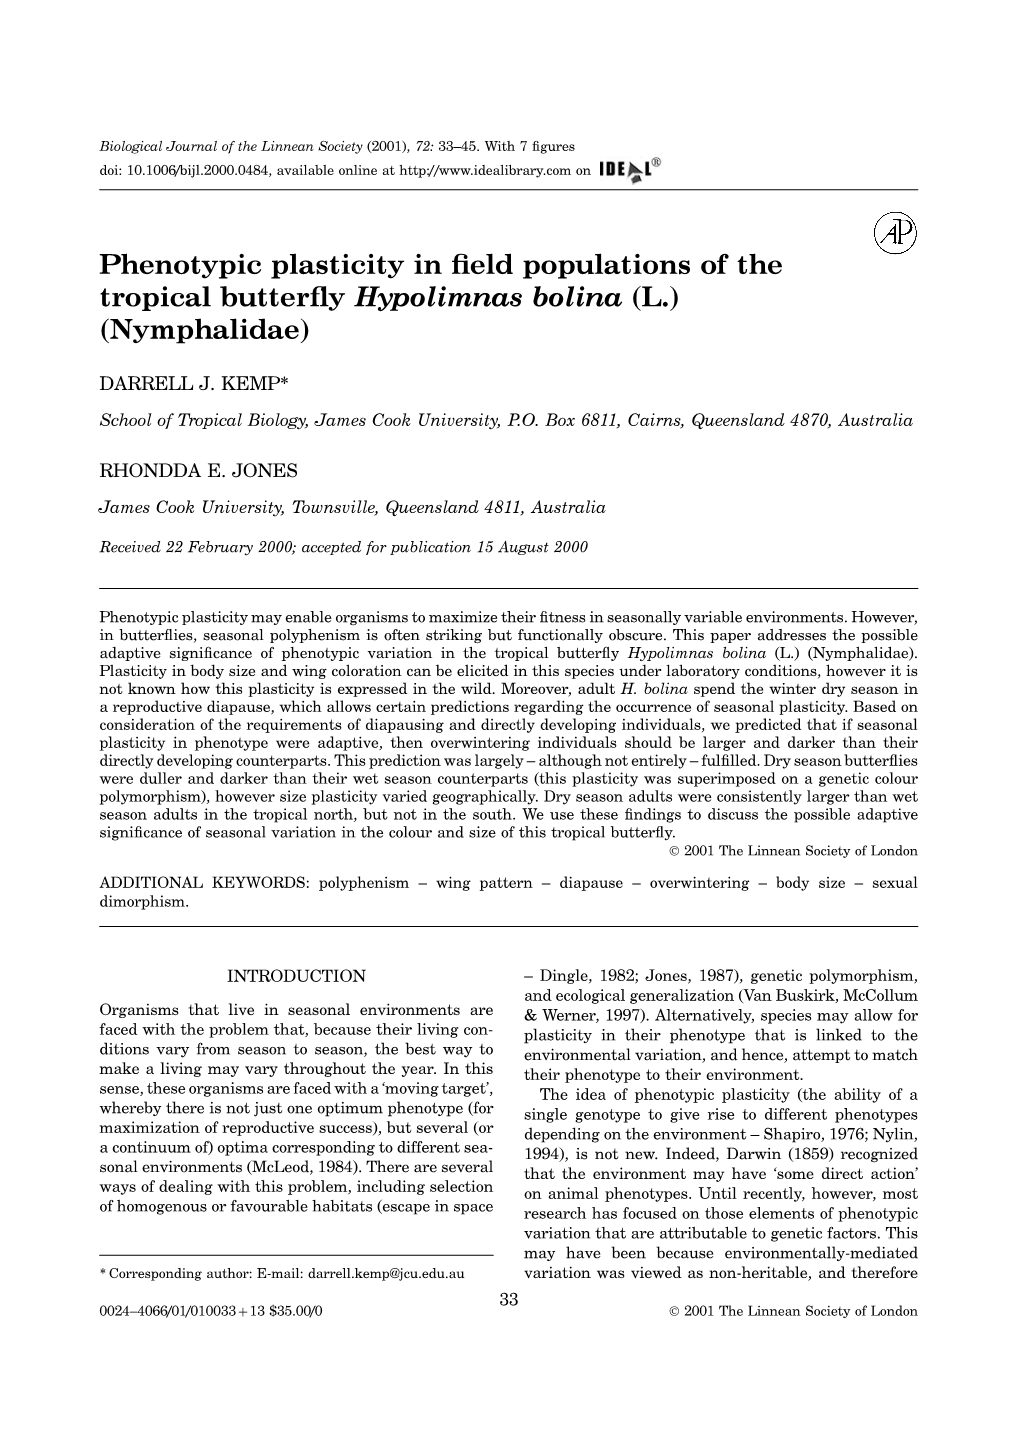 Phenotypic Plasticity in Field Populations of The